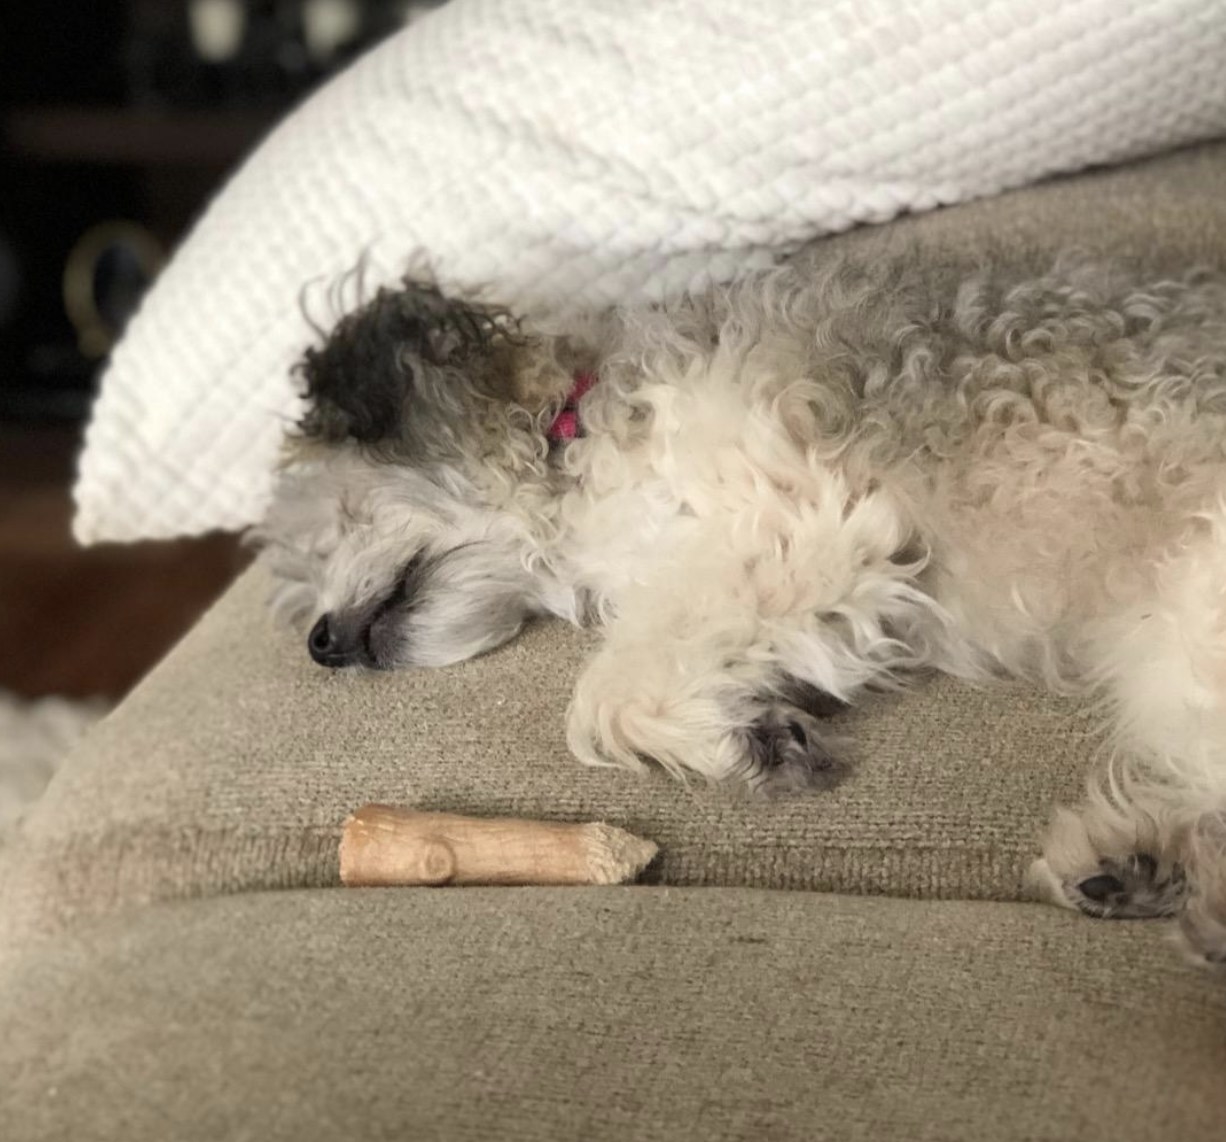 A dog sleeping next to a chewing stick